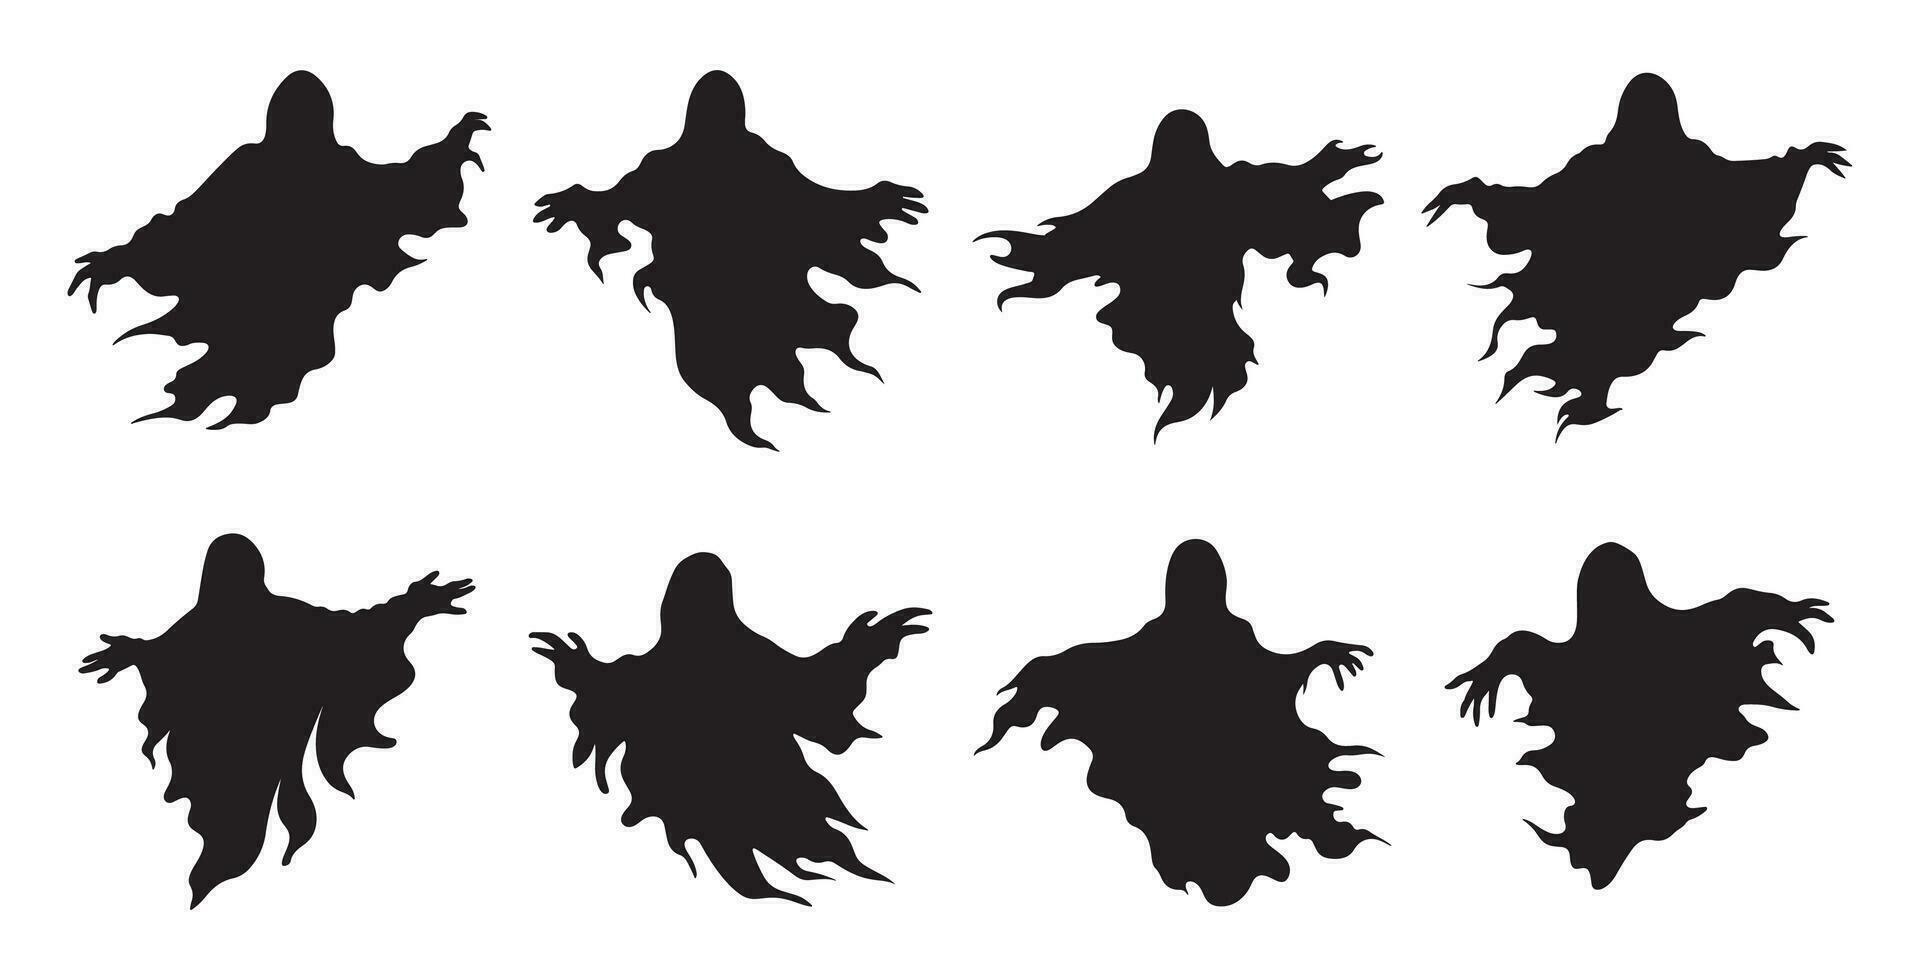 Scary ghost halloween design with siluet style and black and white color vector